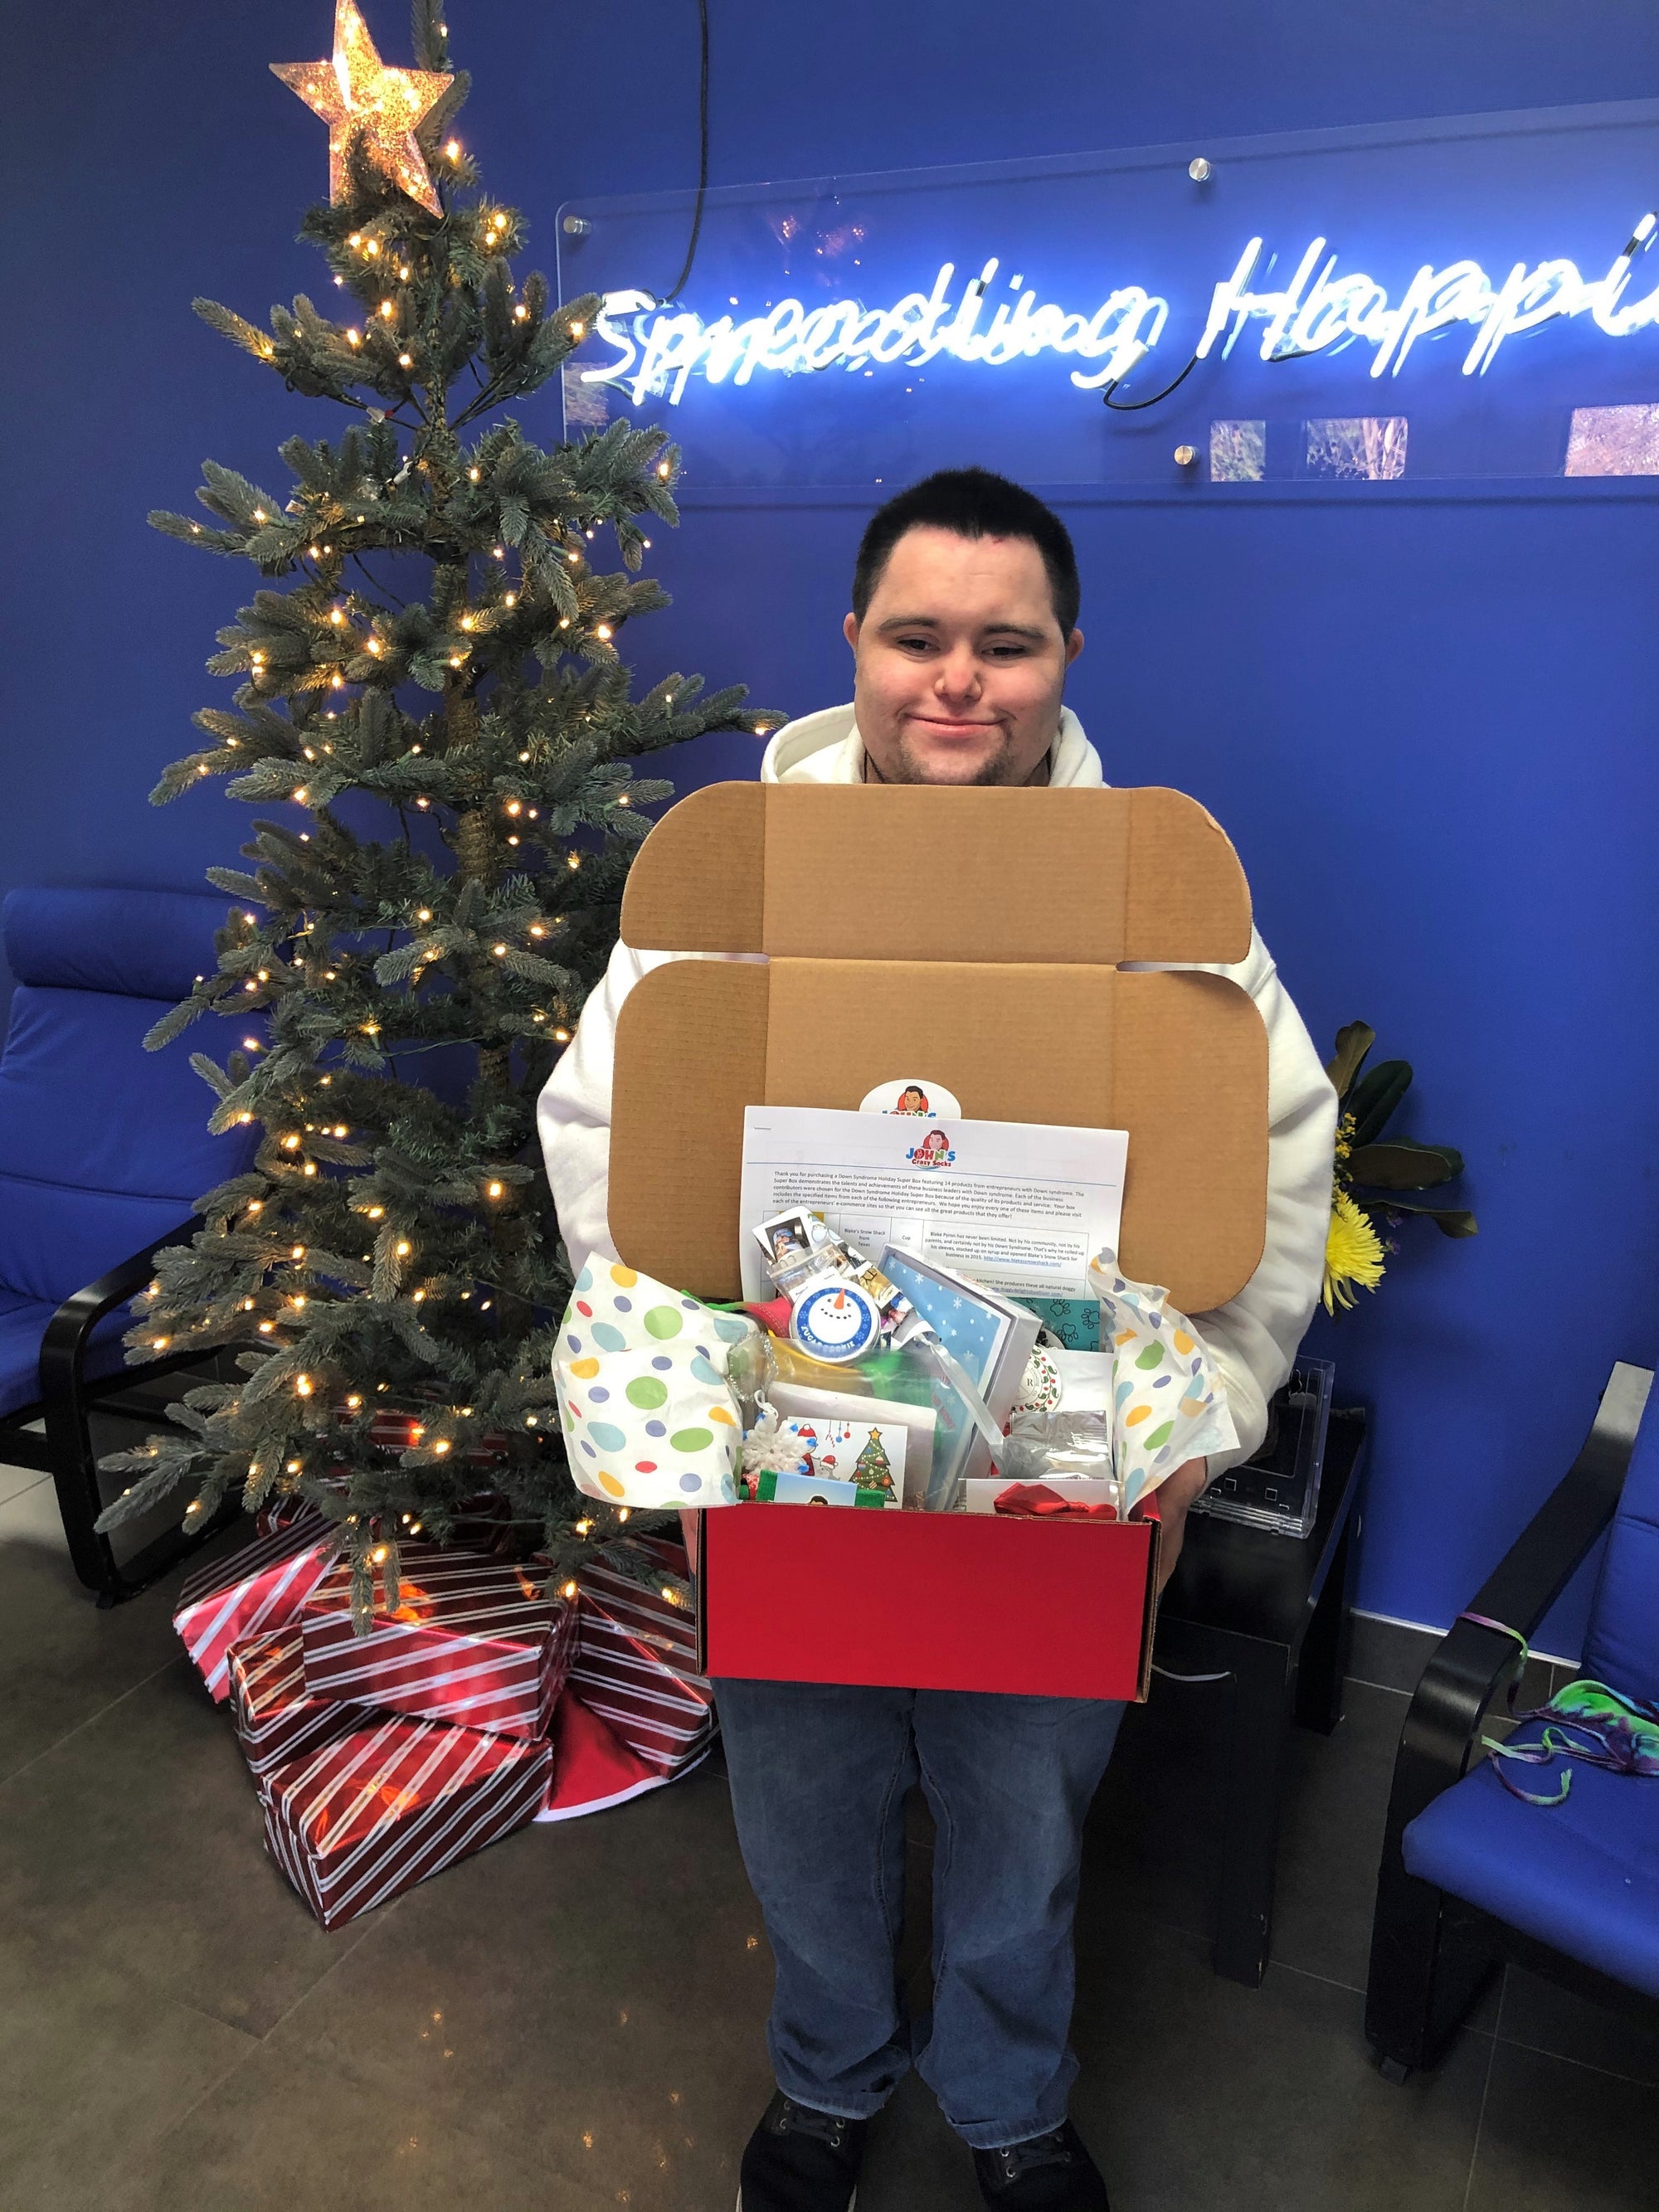 Down Syndrome Holiday Super Box Showcases Entrepreneurs with Down Syndrome